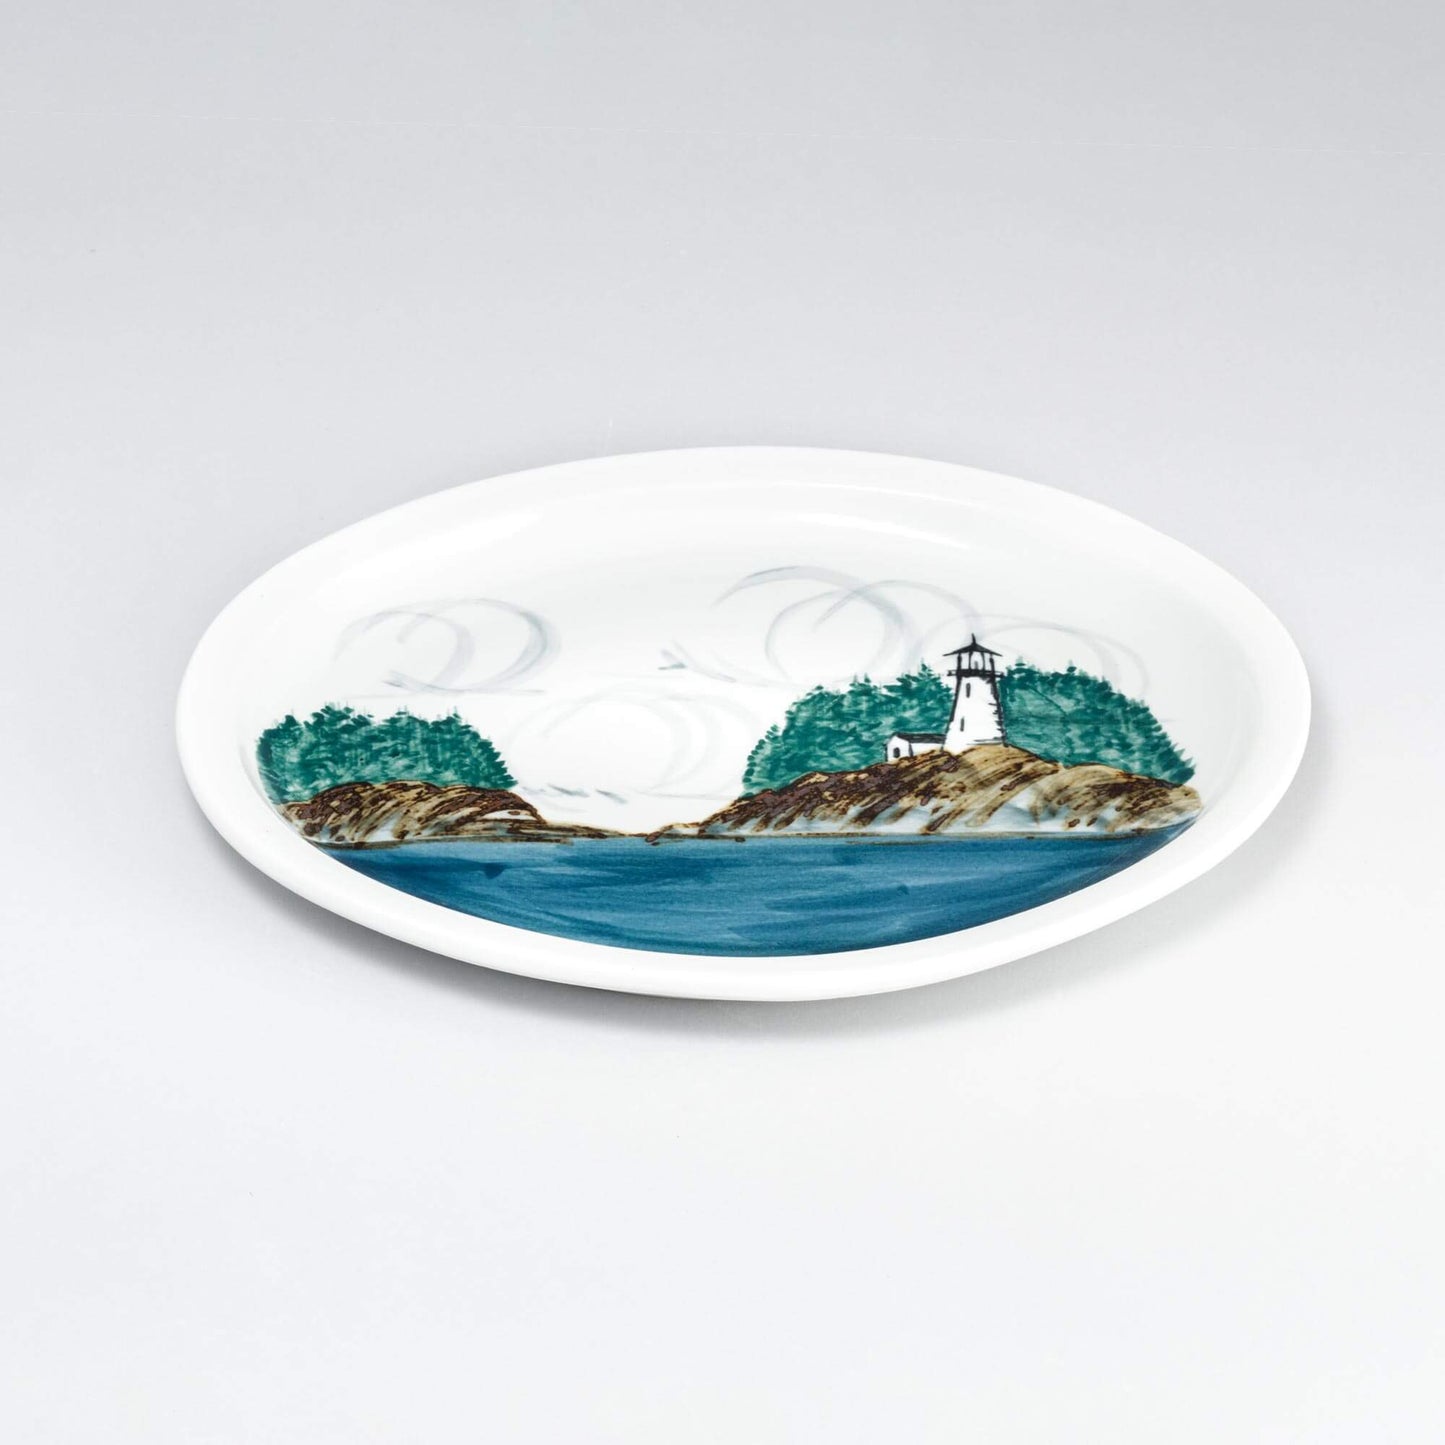 Handmade Pottery Oval Platter in Lighthouse pattern made by Georgetown Pottery in Maine